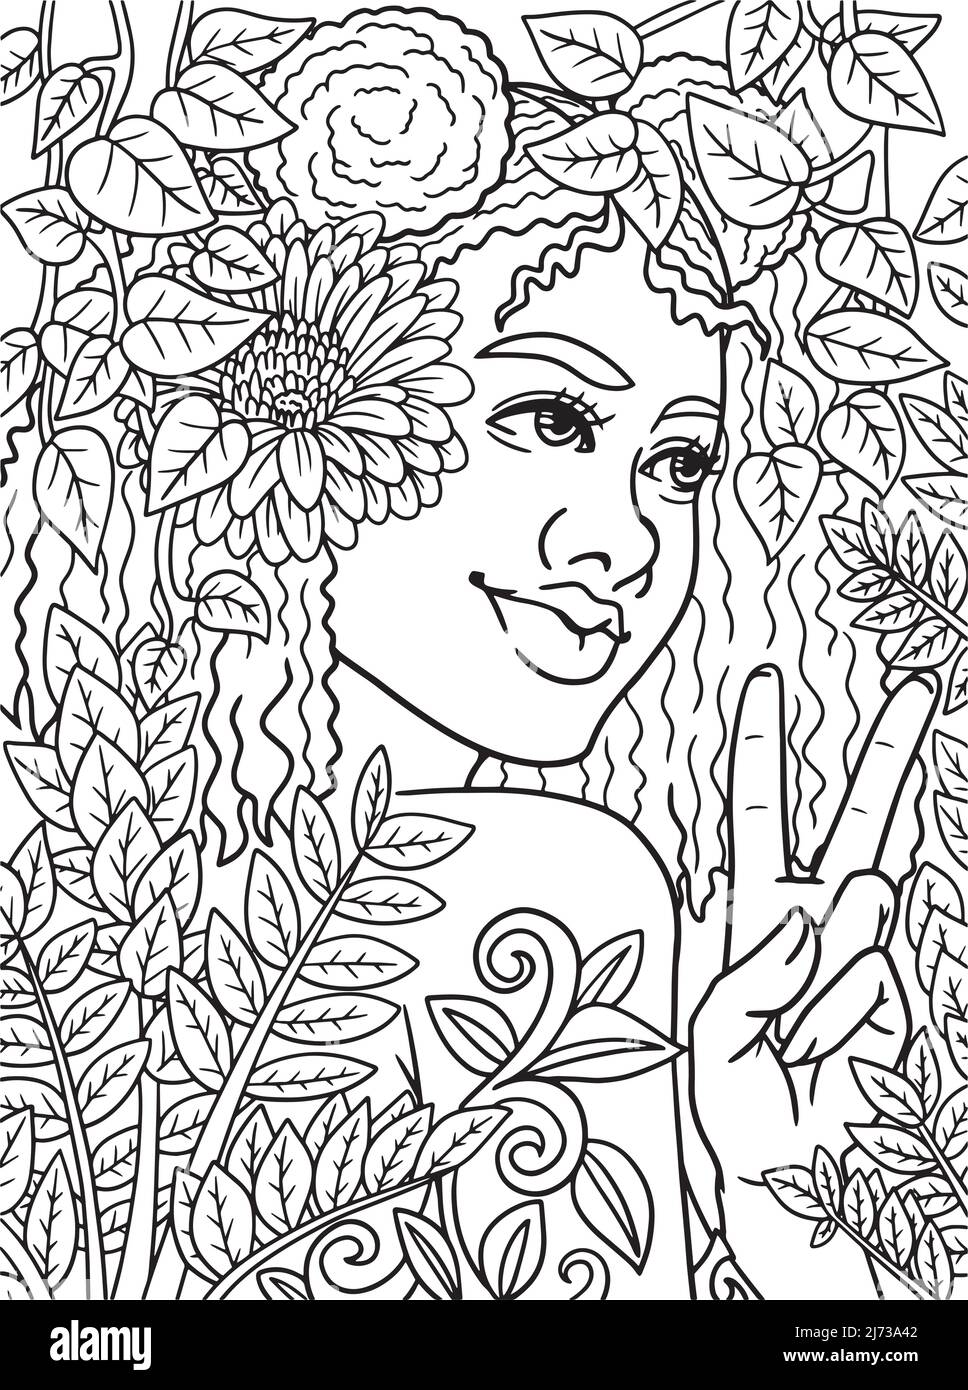 Afro American Beautiful Woman Adult Coloring Page  Stock Vector